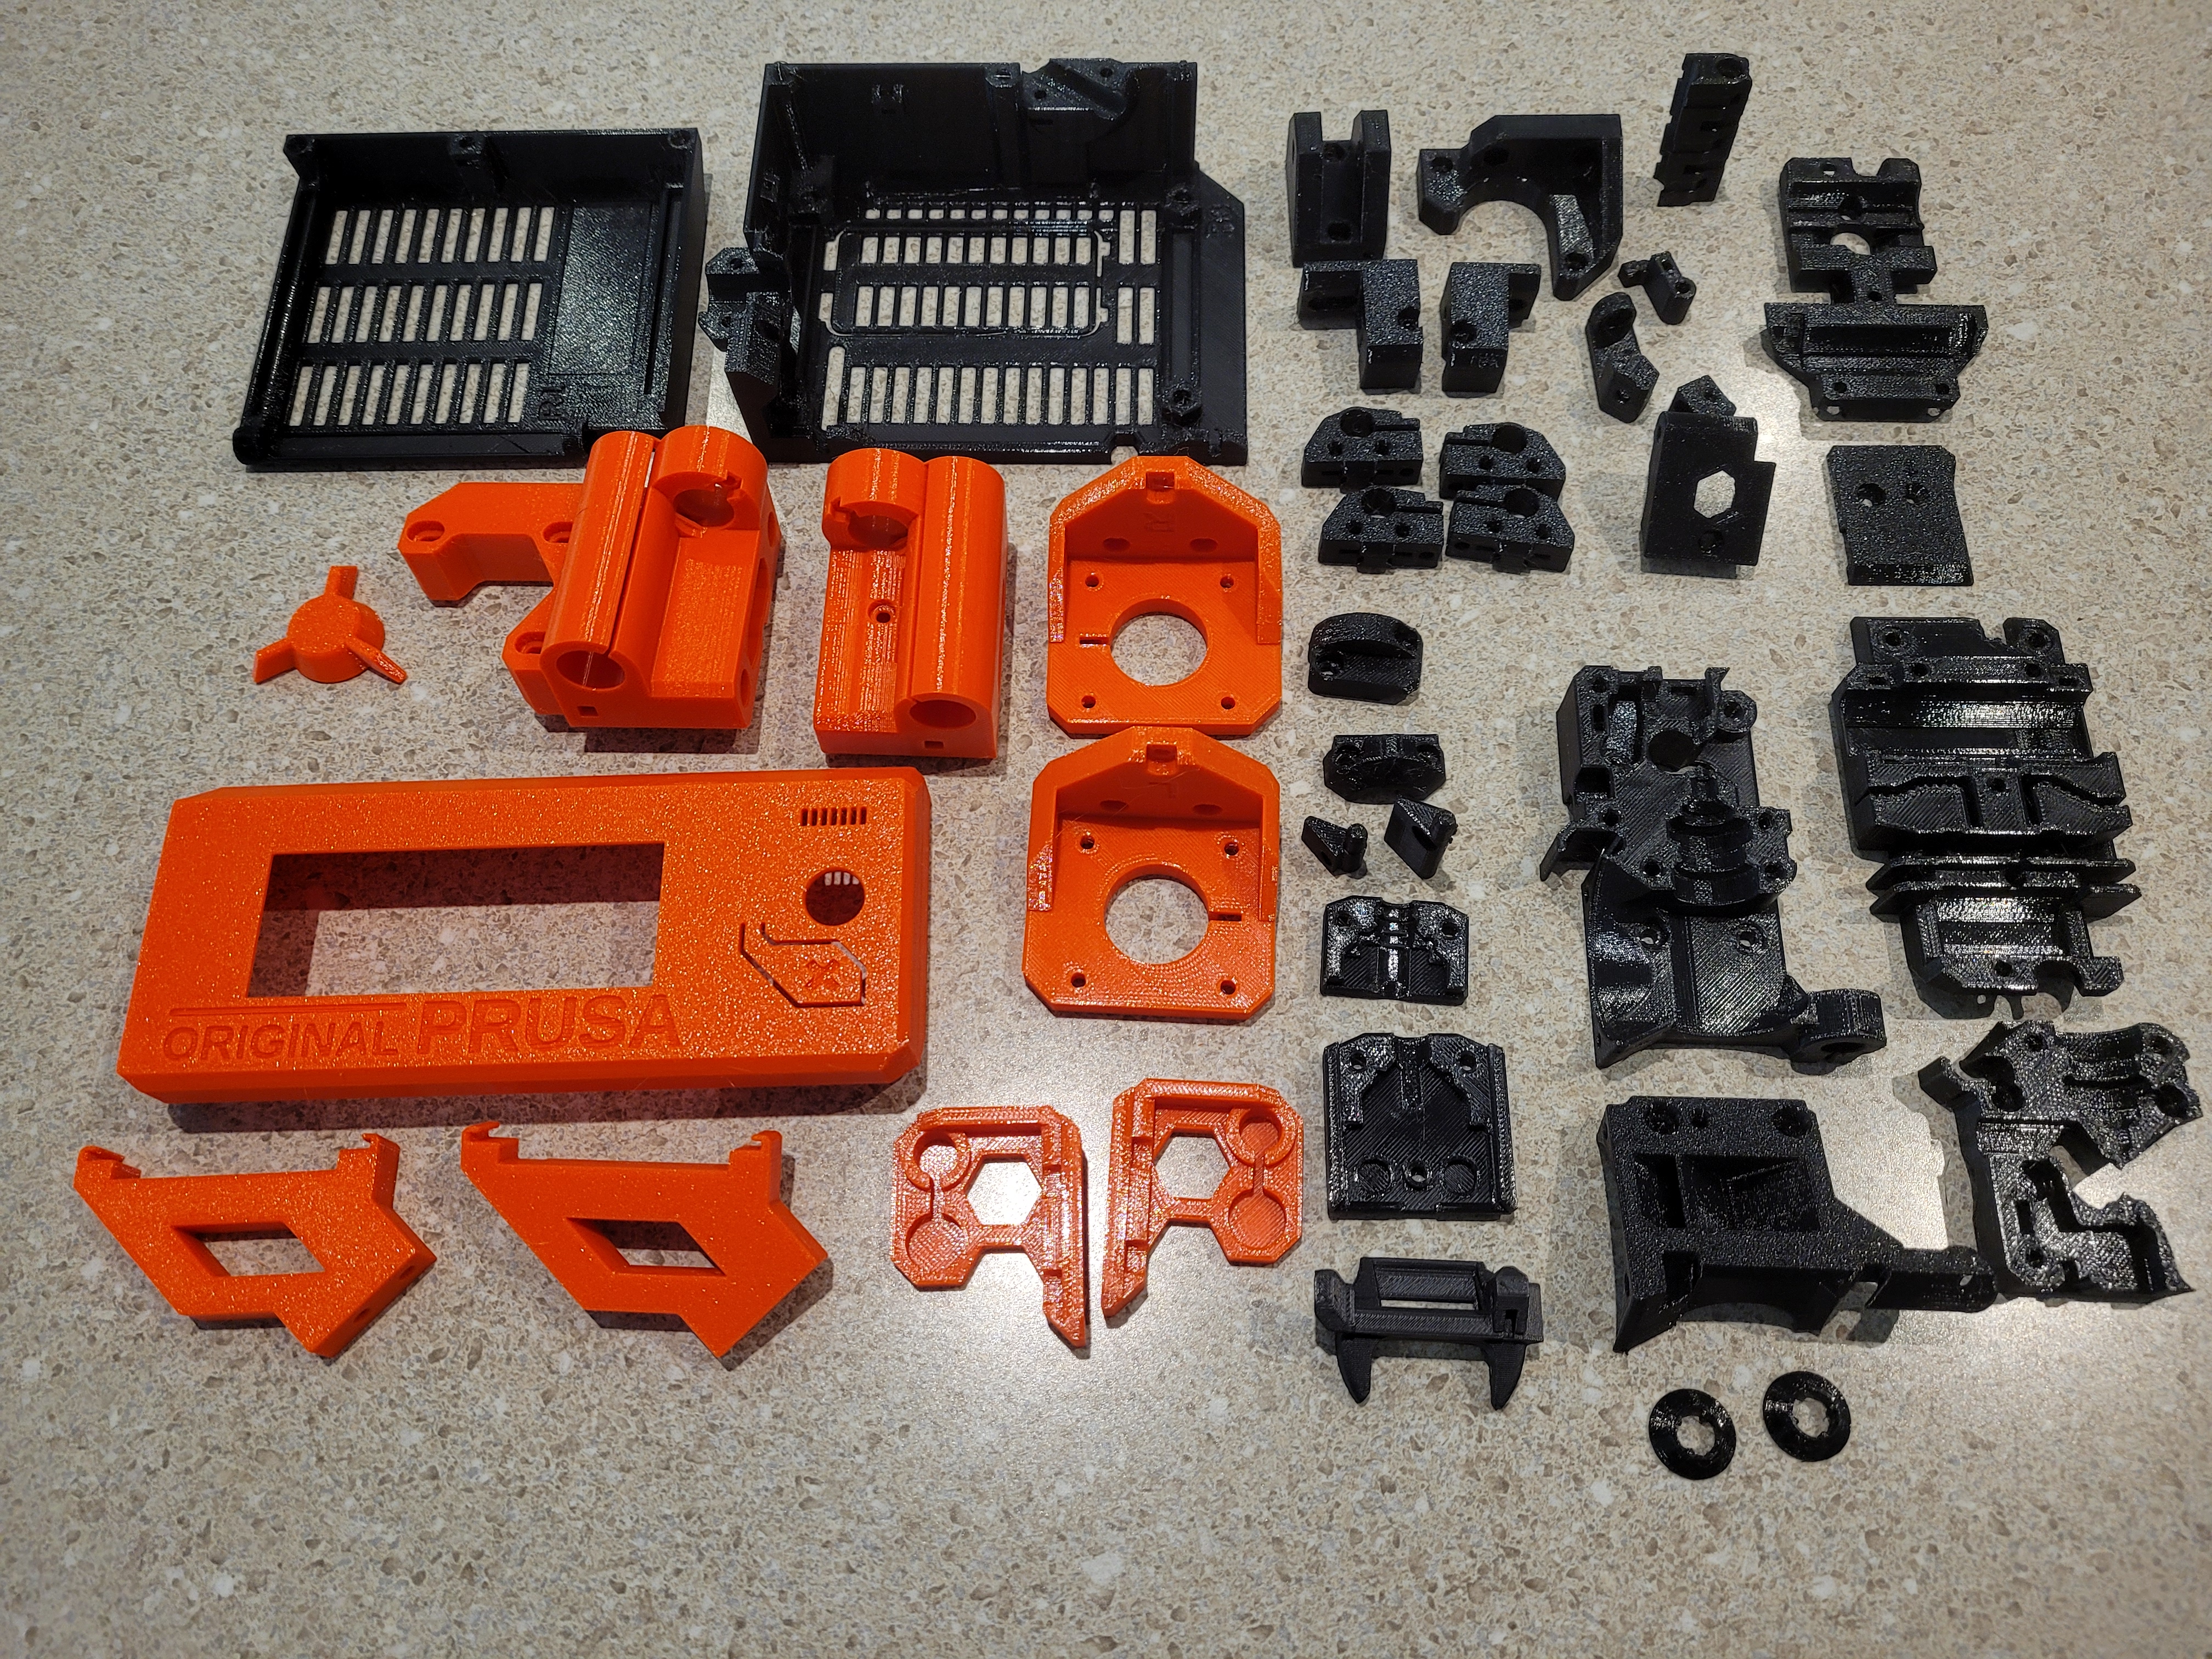 3D printed parts for the PRUSA MK3S+